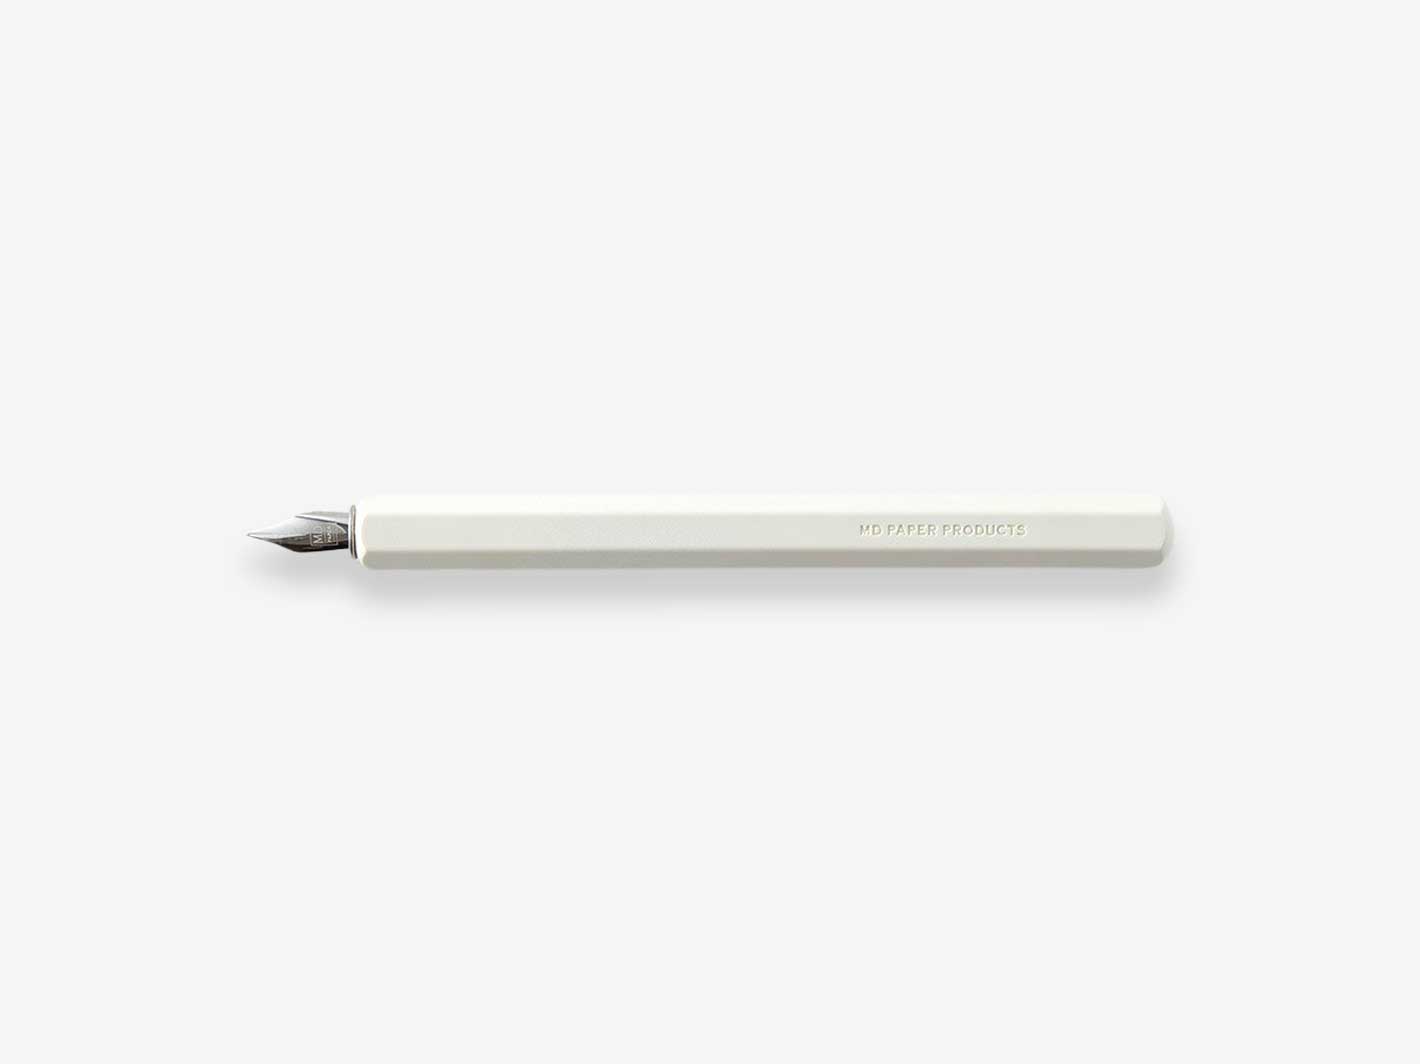  MD Paper Midori Designphil Fountain Pen 38079006 MD Fountain  Pen Medium Point With Kanji LOVE Sticker, White, 0.43 x 5.23 in : Office  Products